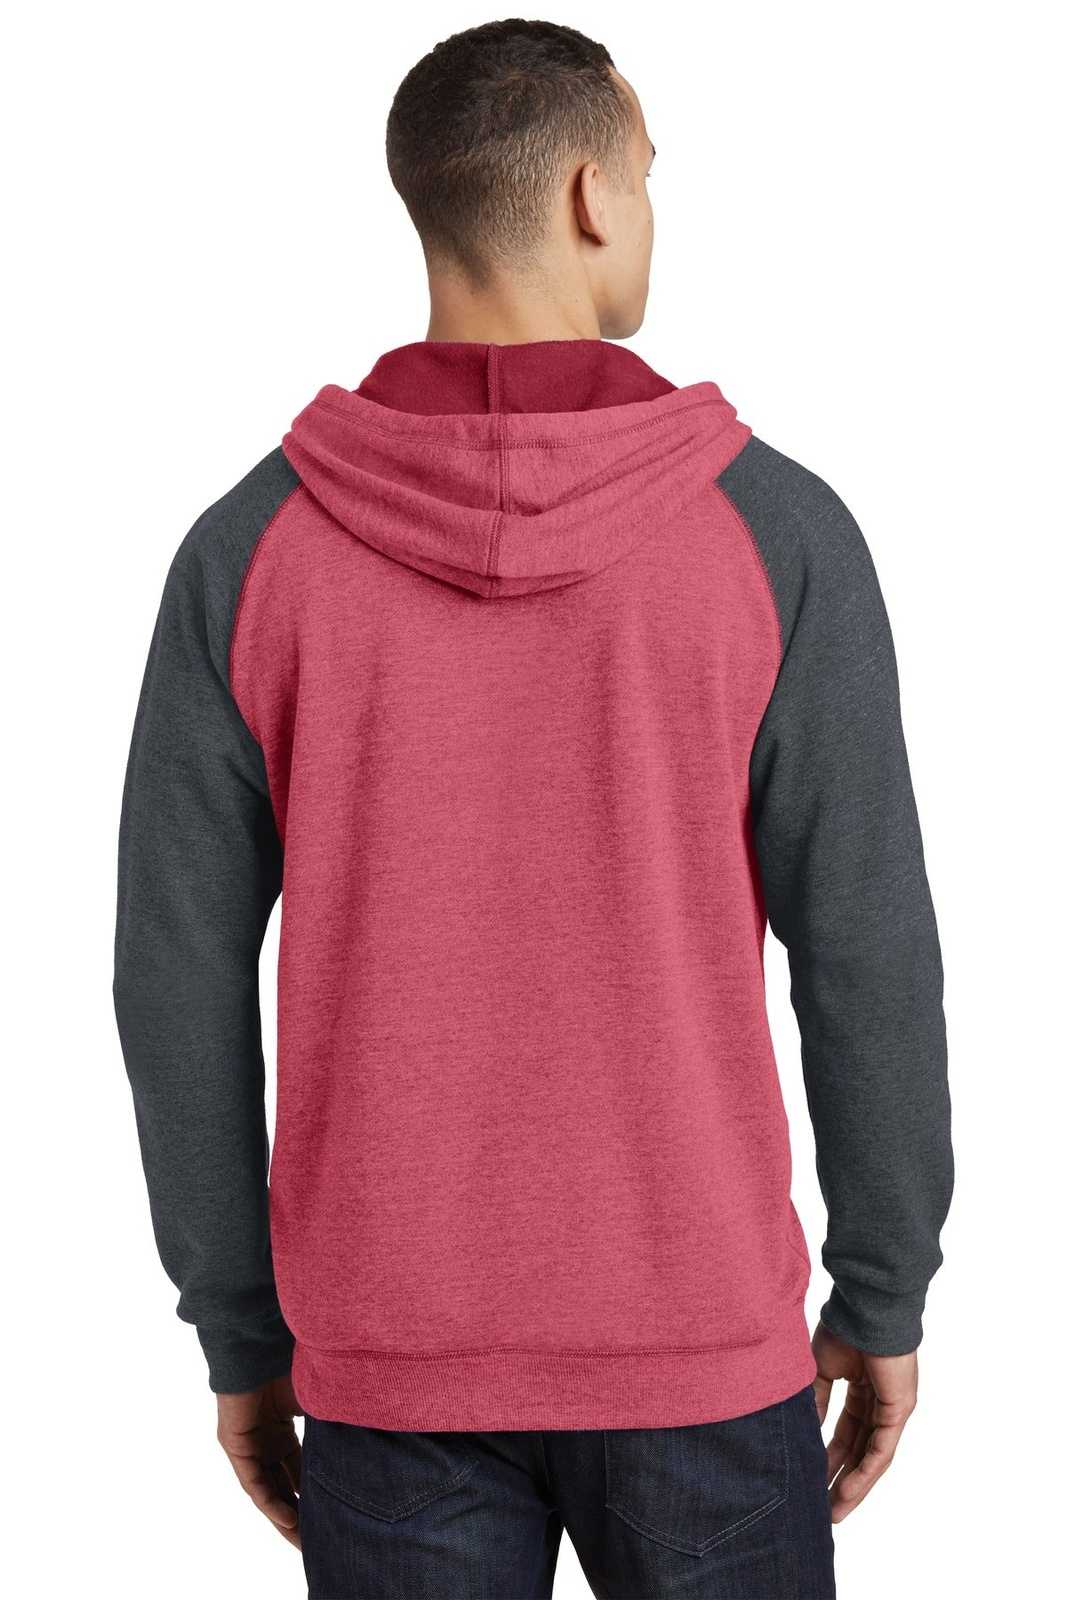 District DT196 Young Mens Lightweight Fleece Raglan Hoodie - Heathered Red Heathered Charcoal - HIT a Double - 2